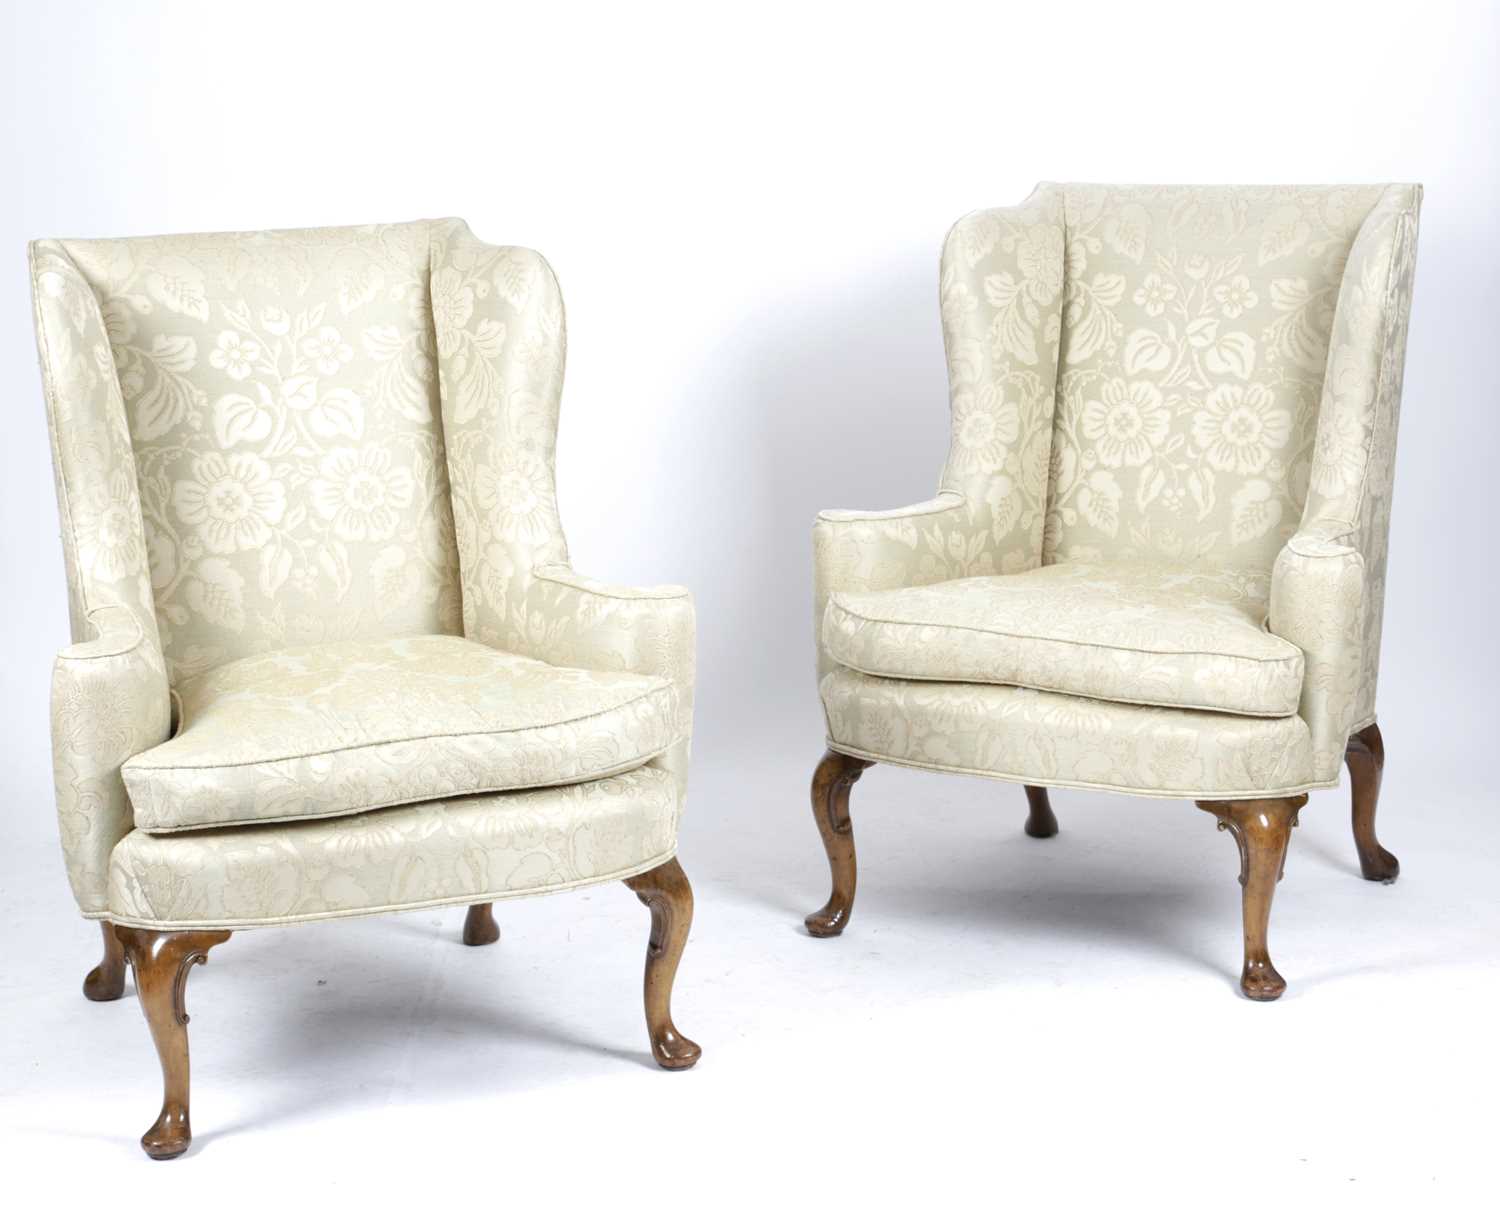 A PAIR WALNUT WING ARMCHAIRS IN QUEEN ANNE STYLE, LATE 19TH CENTURY each with an upholstered back, - Image 2 of 3